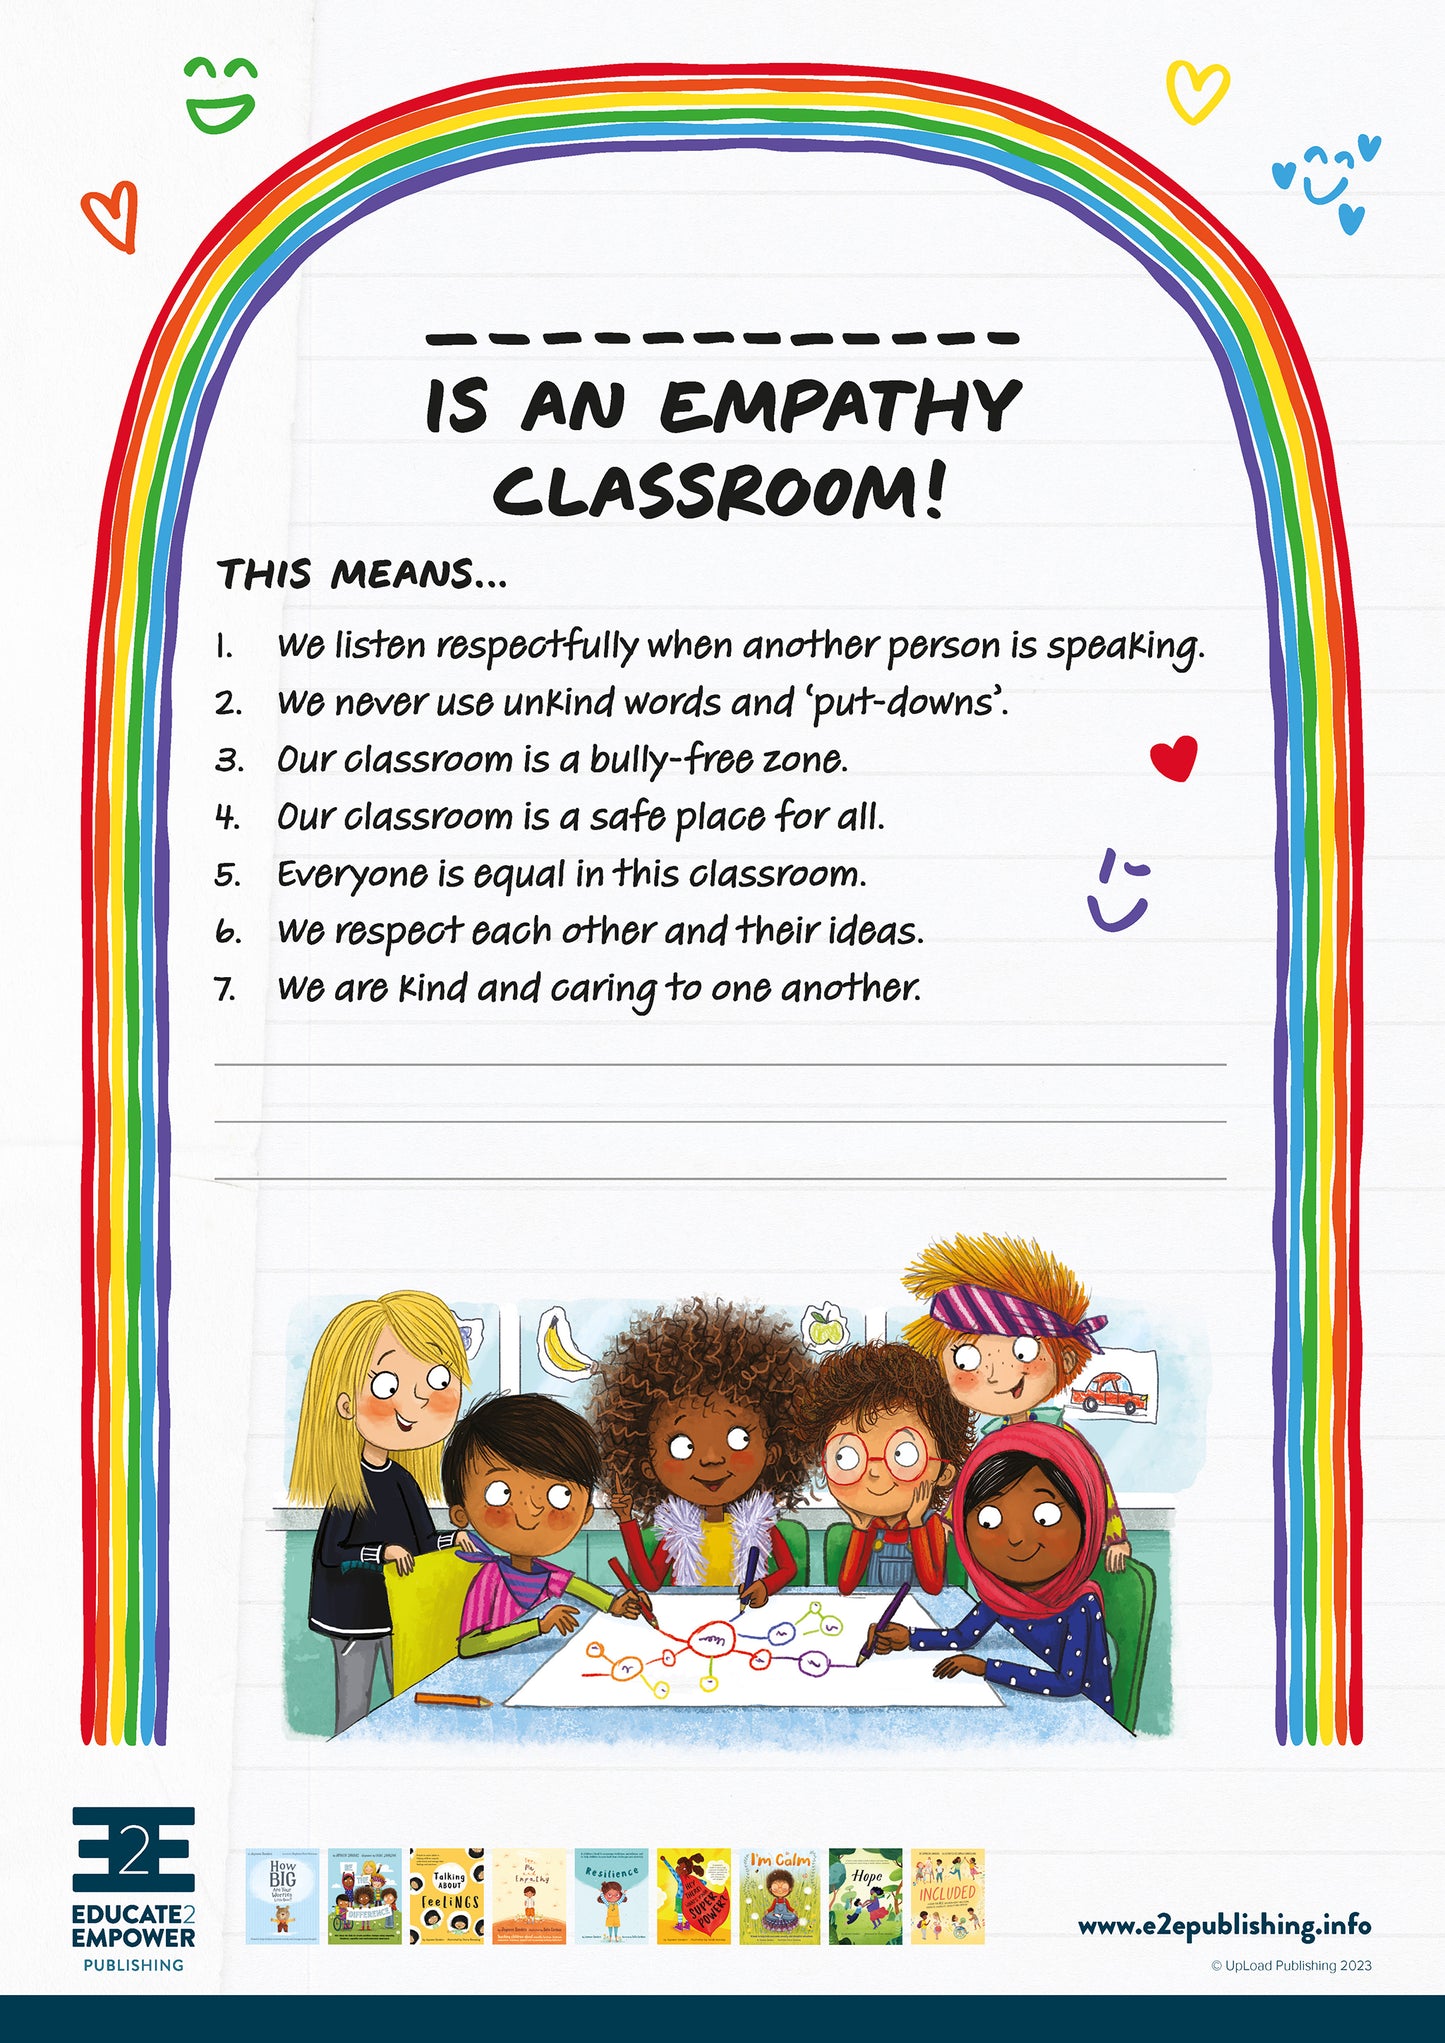 A poster titled 'This is and Empathy Classroom' with 7 points about what this statement means in practice.